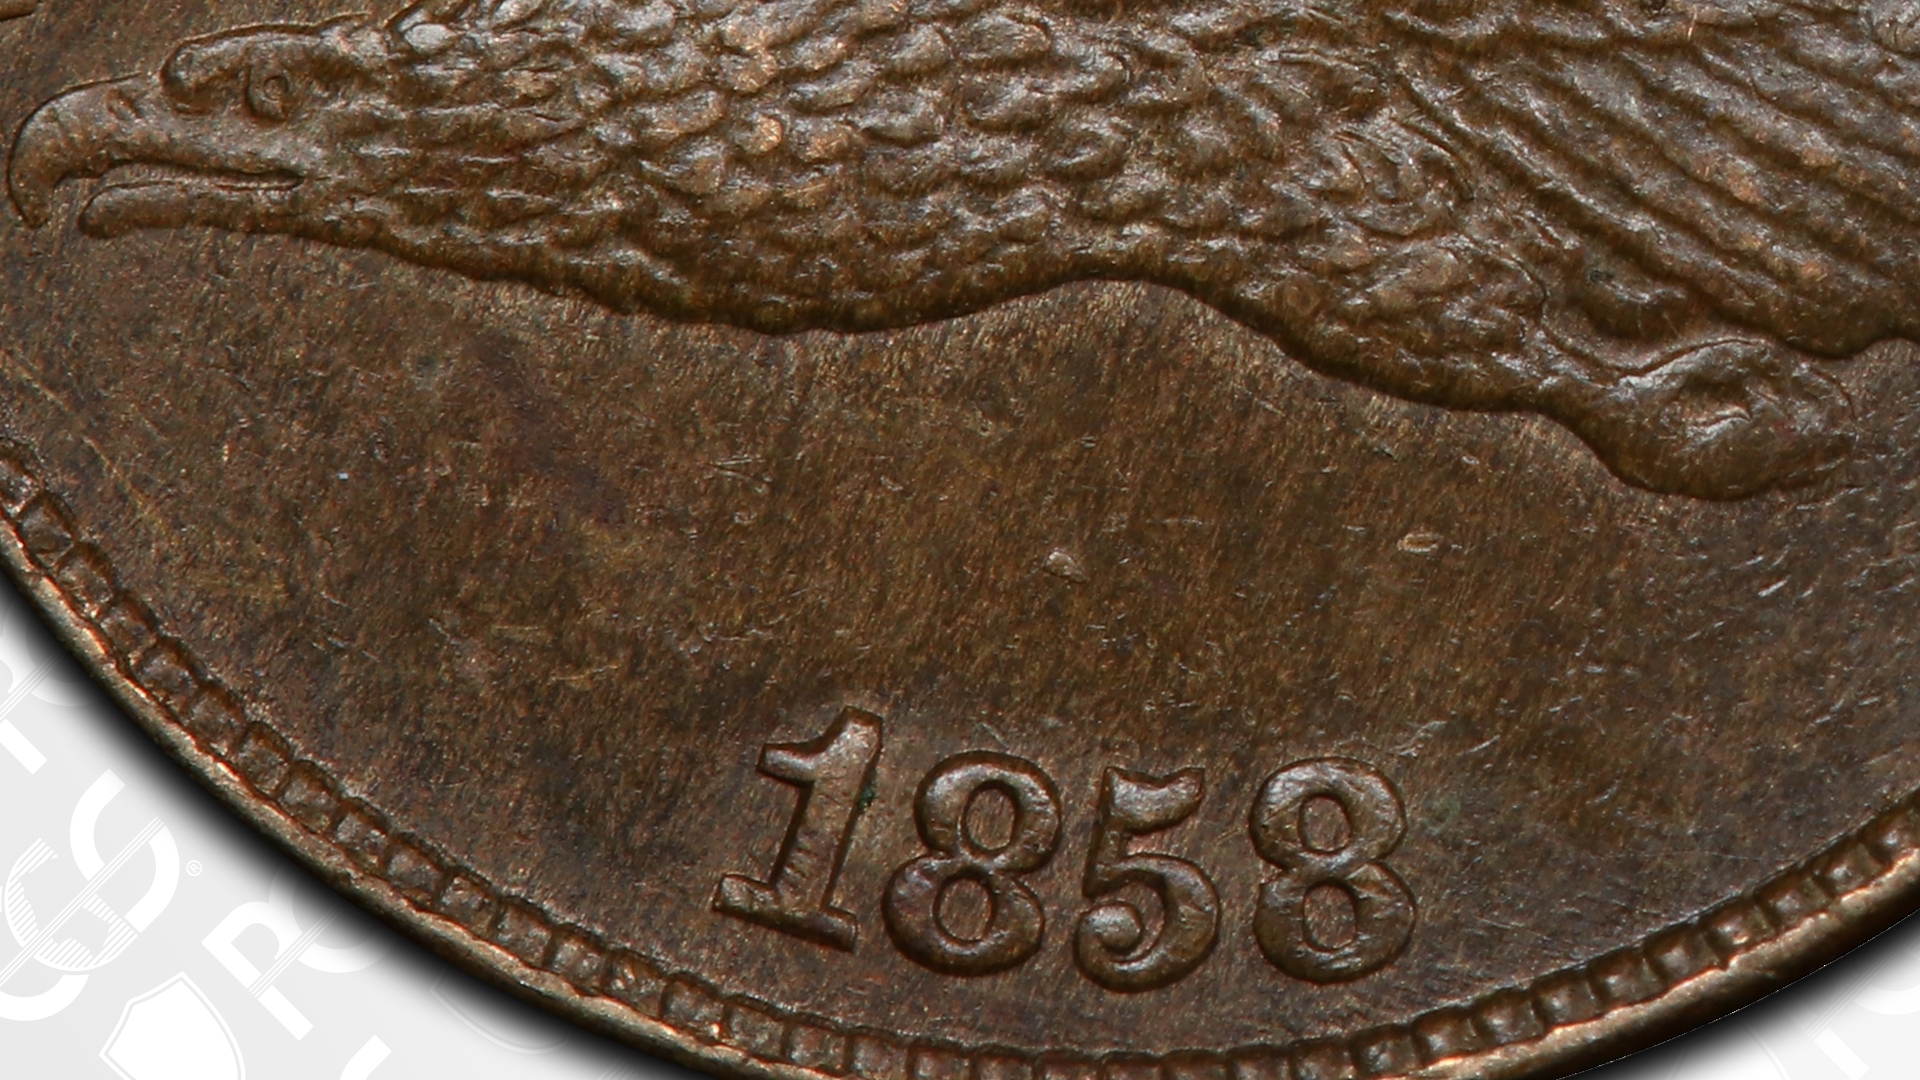 1858/7 Flying Eagle Cent Strong Overdate FS-301 S-1 PCGS AU55